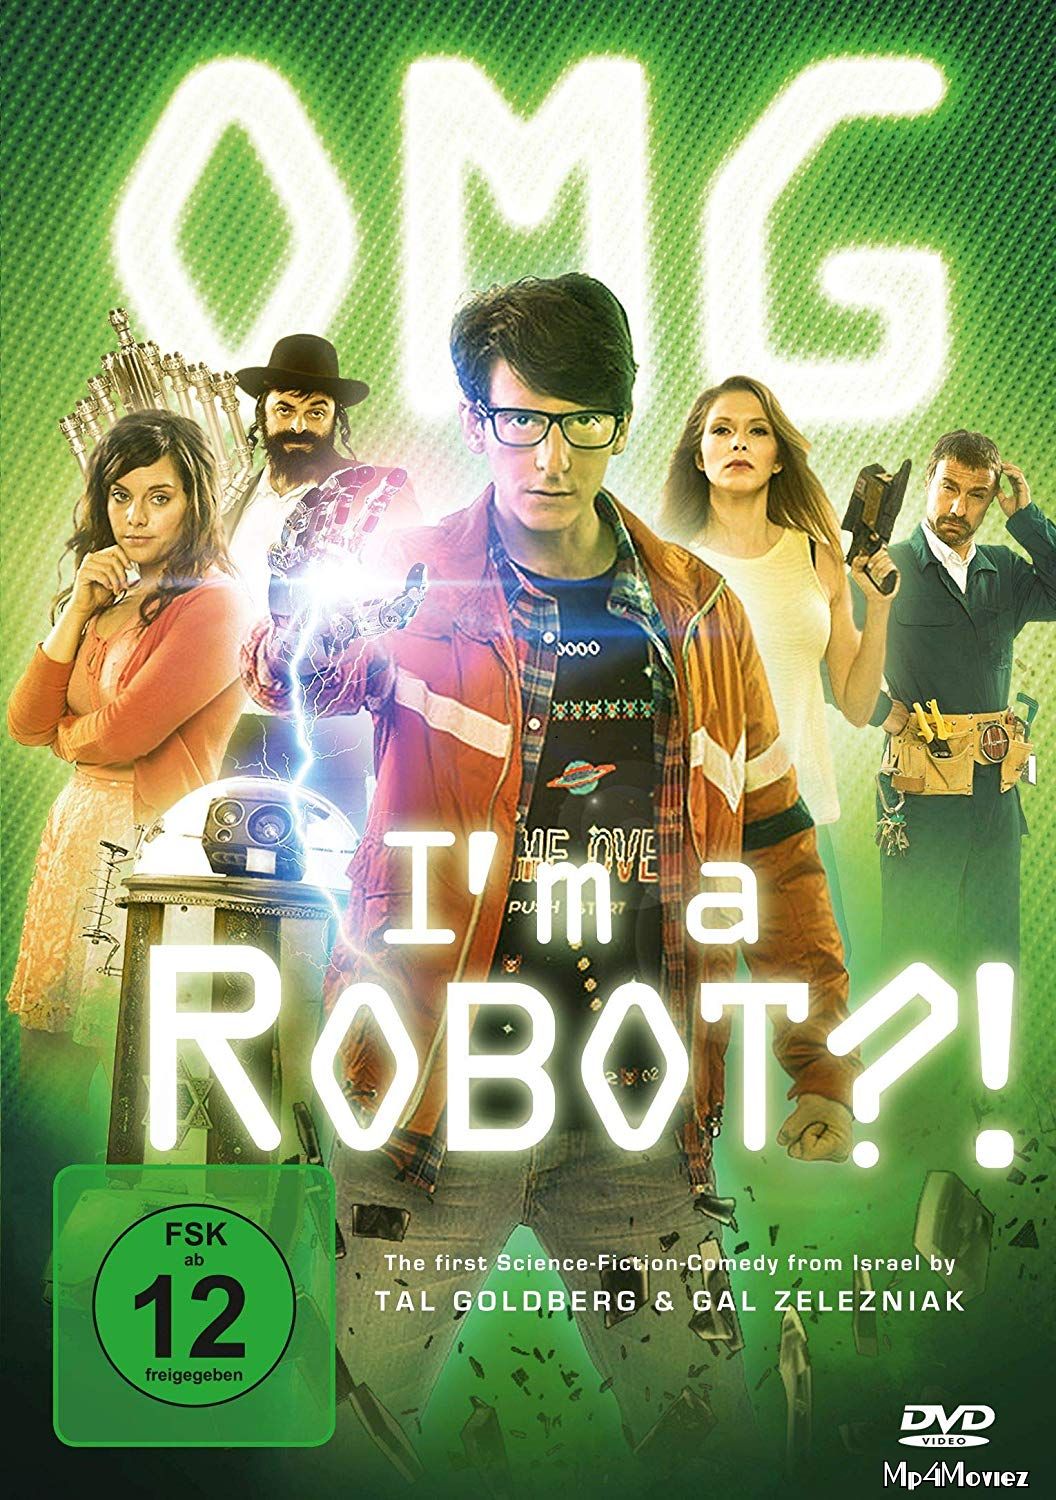 OMG I am a Robot (2015) Hindi Dubbed HDRip download full movie